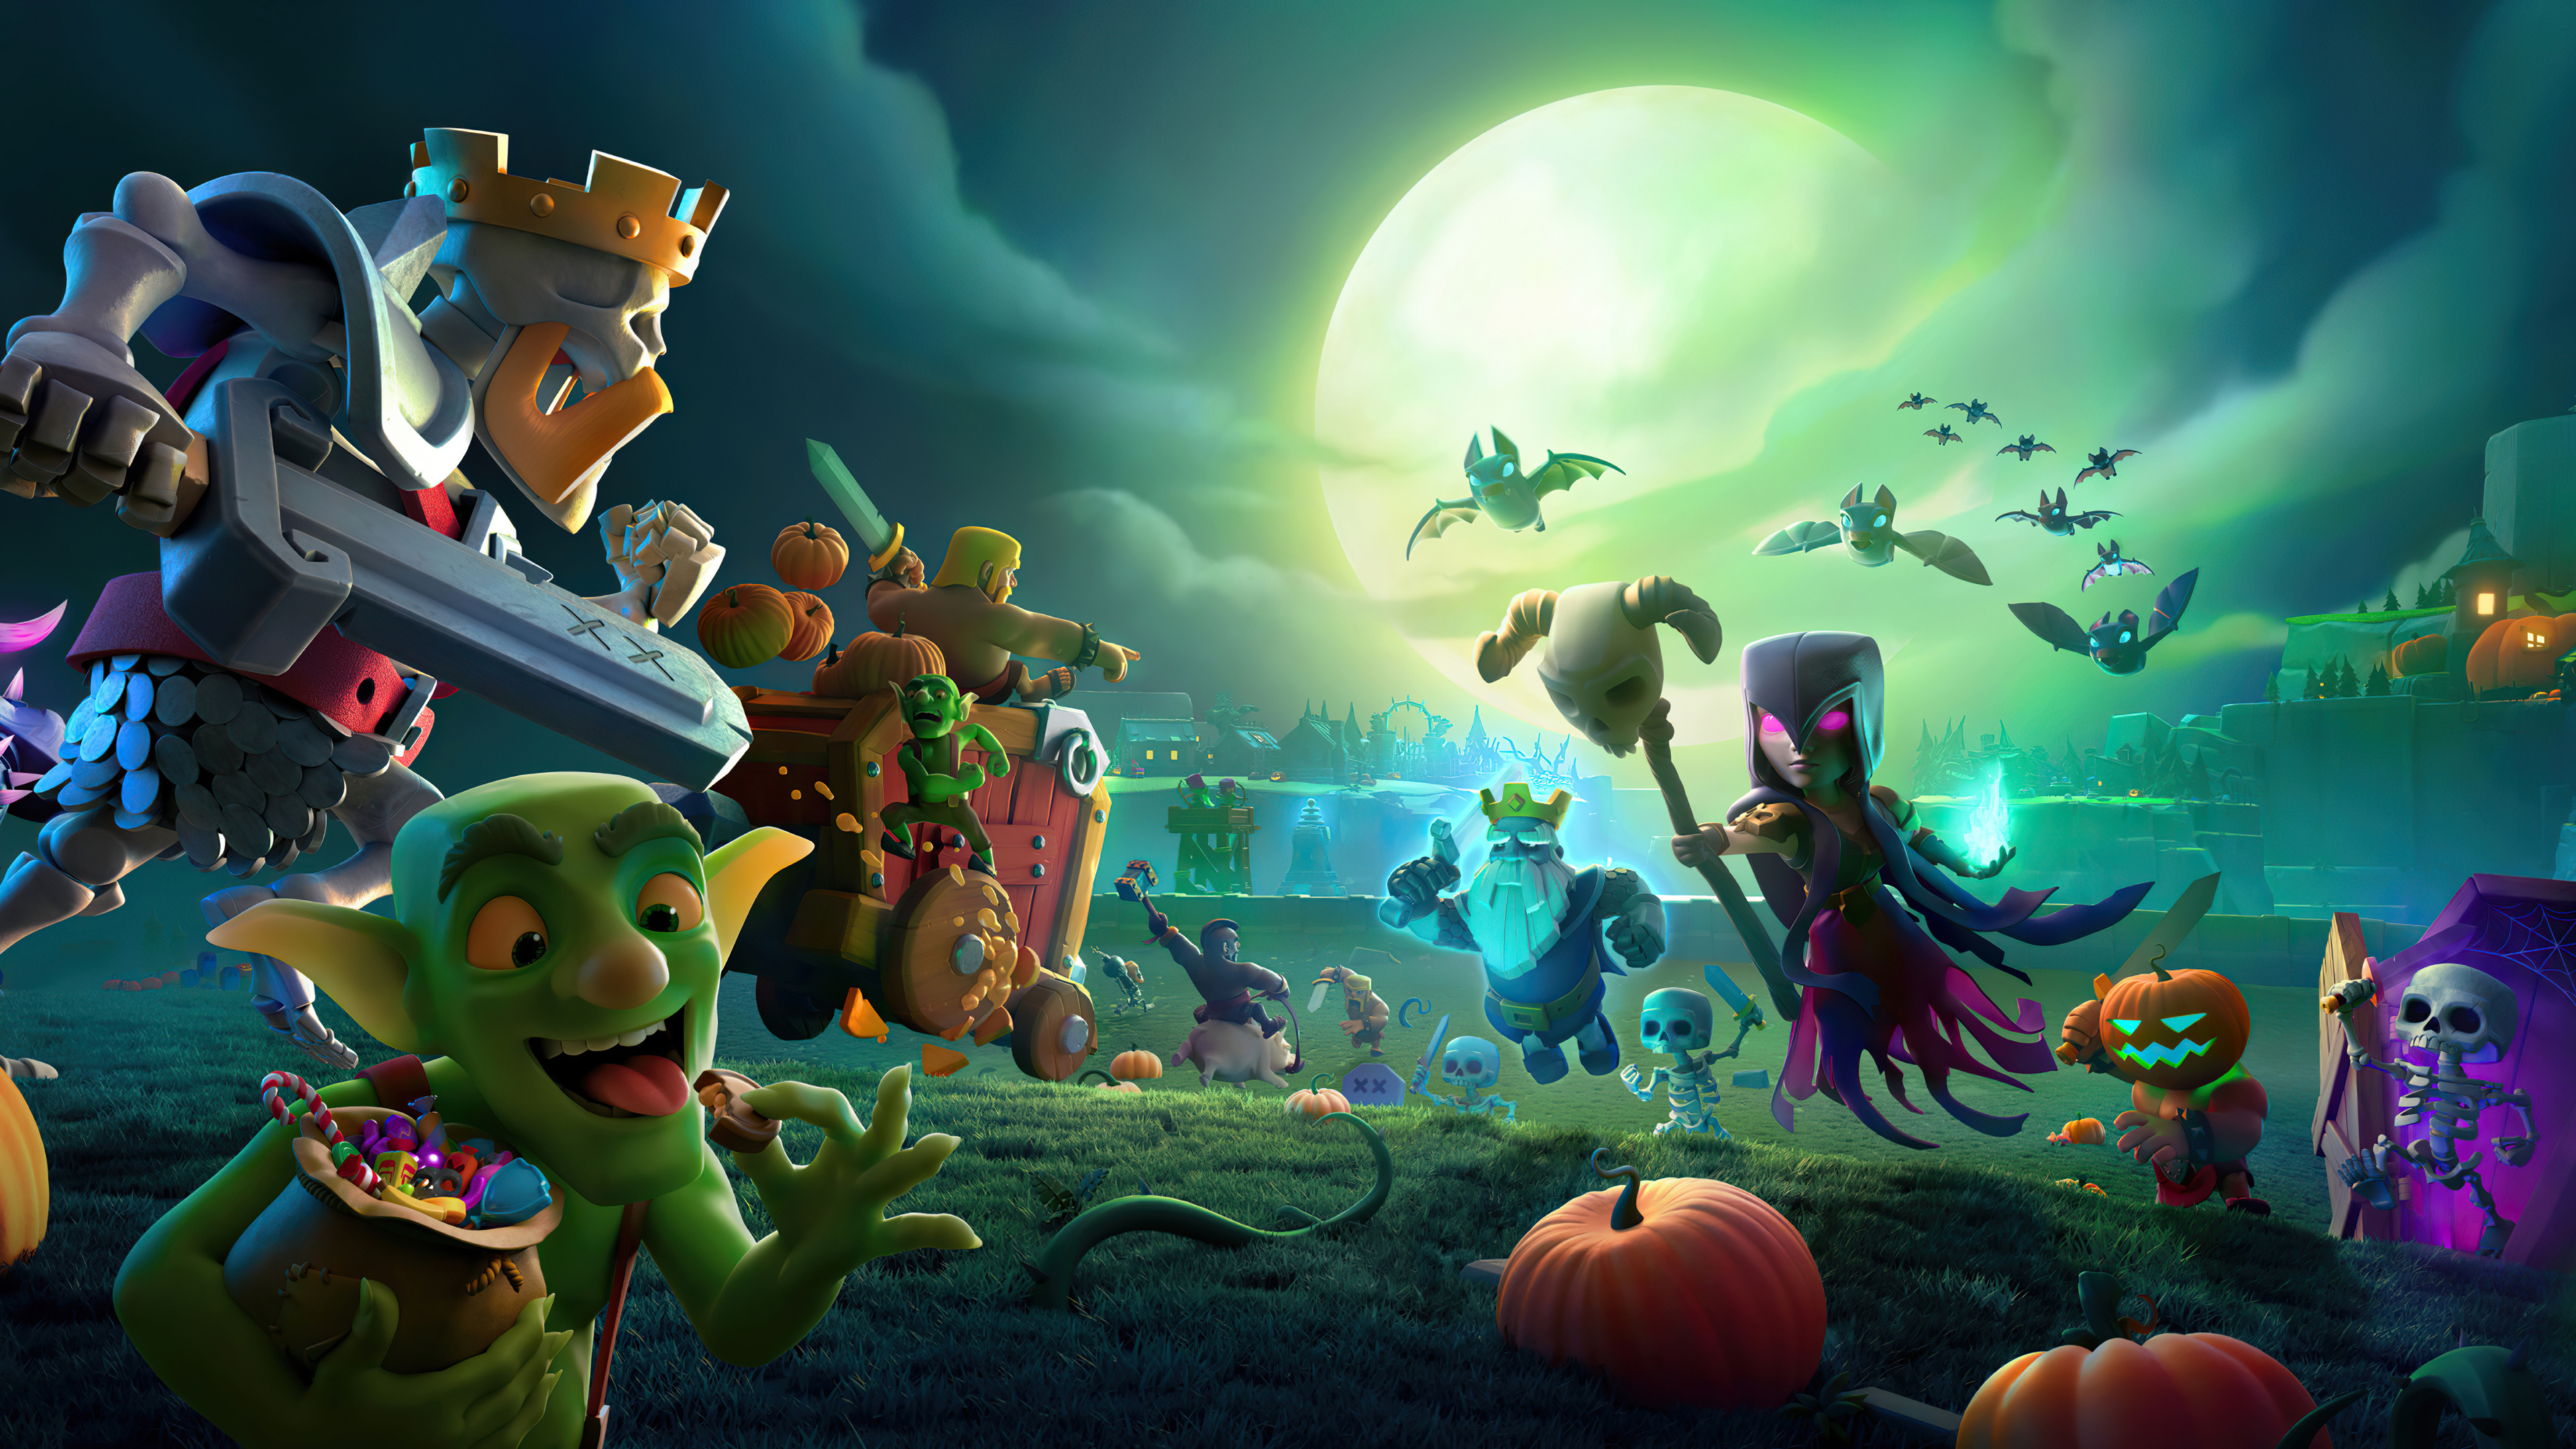 Clash of Clans: The game is set in a fantasy-themed persistent world where the player is a chief of a village. 3840x2160 4K Wallpaper.